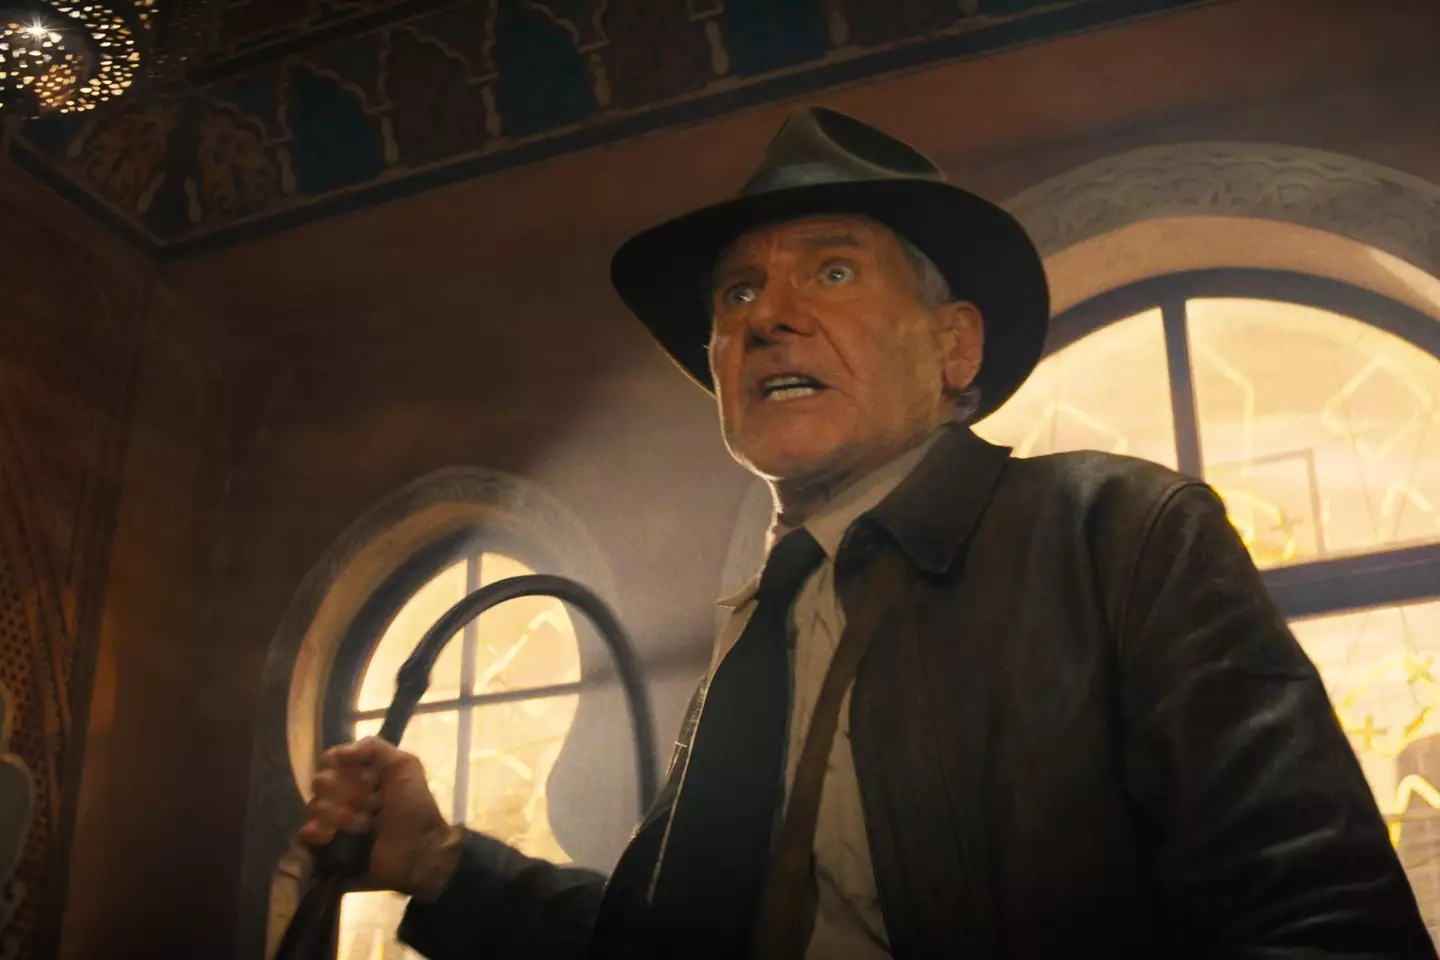 This is Harrison Ford and Indiana Jones' last outing.